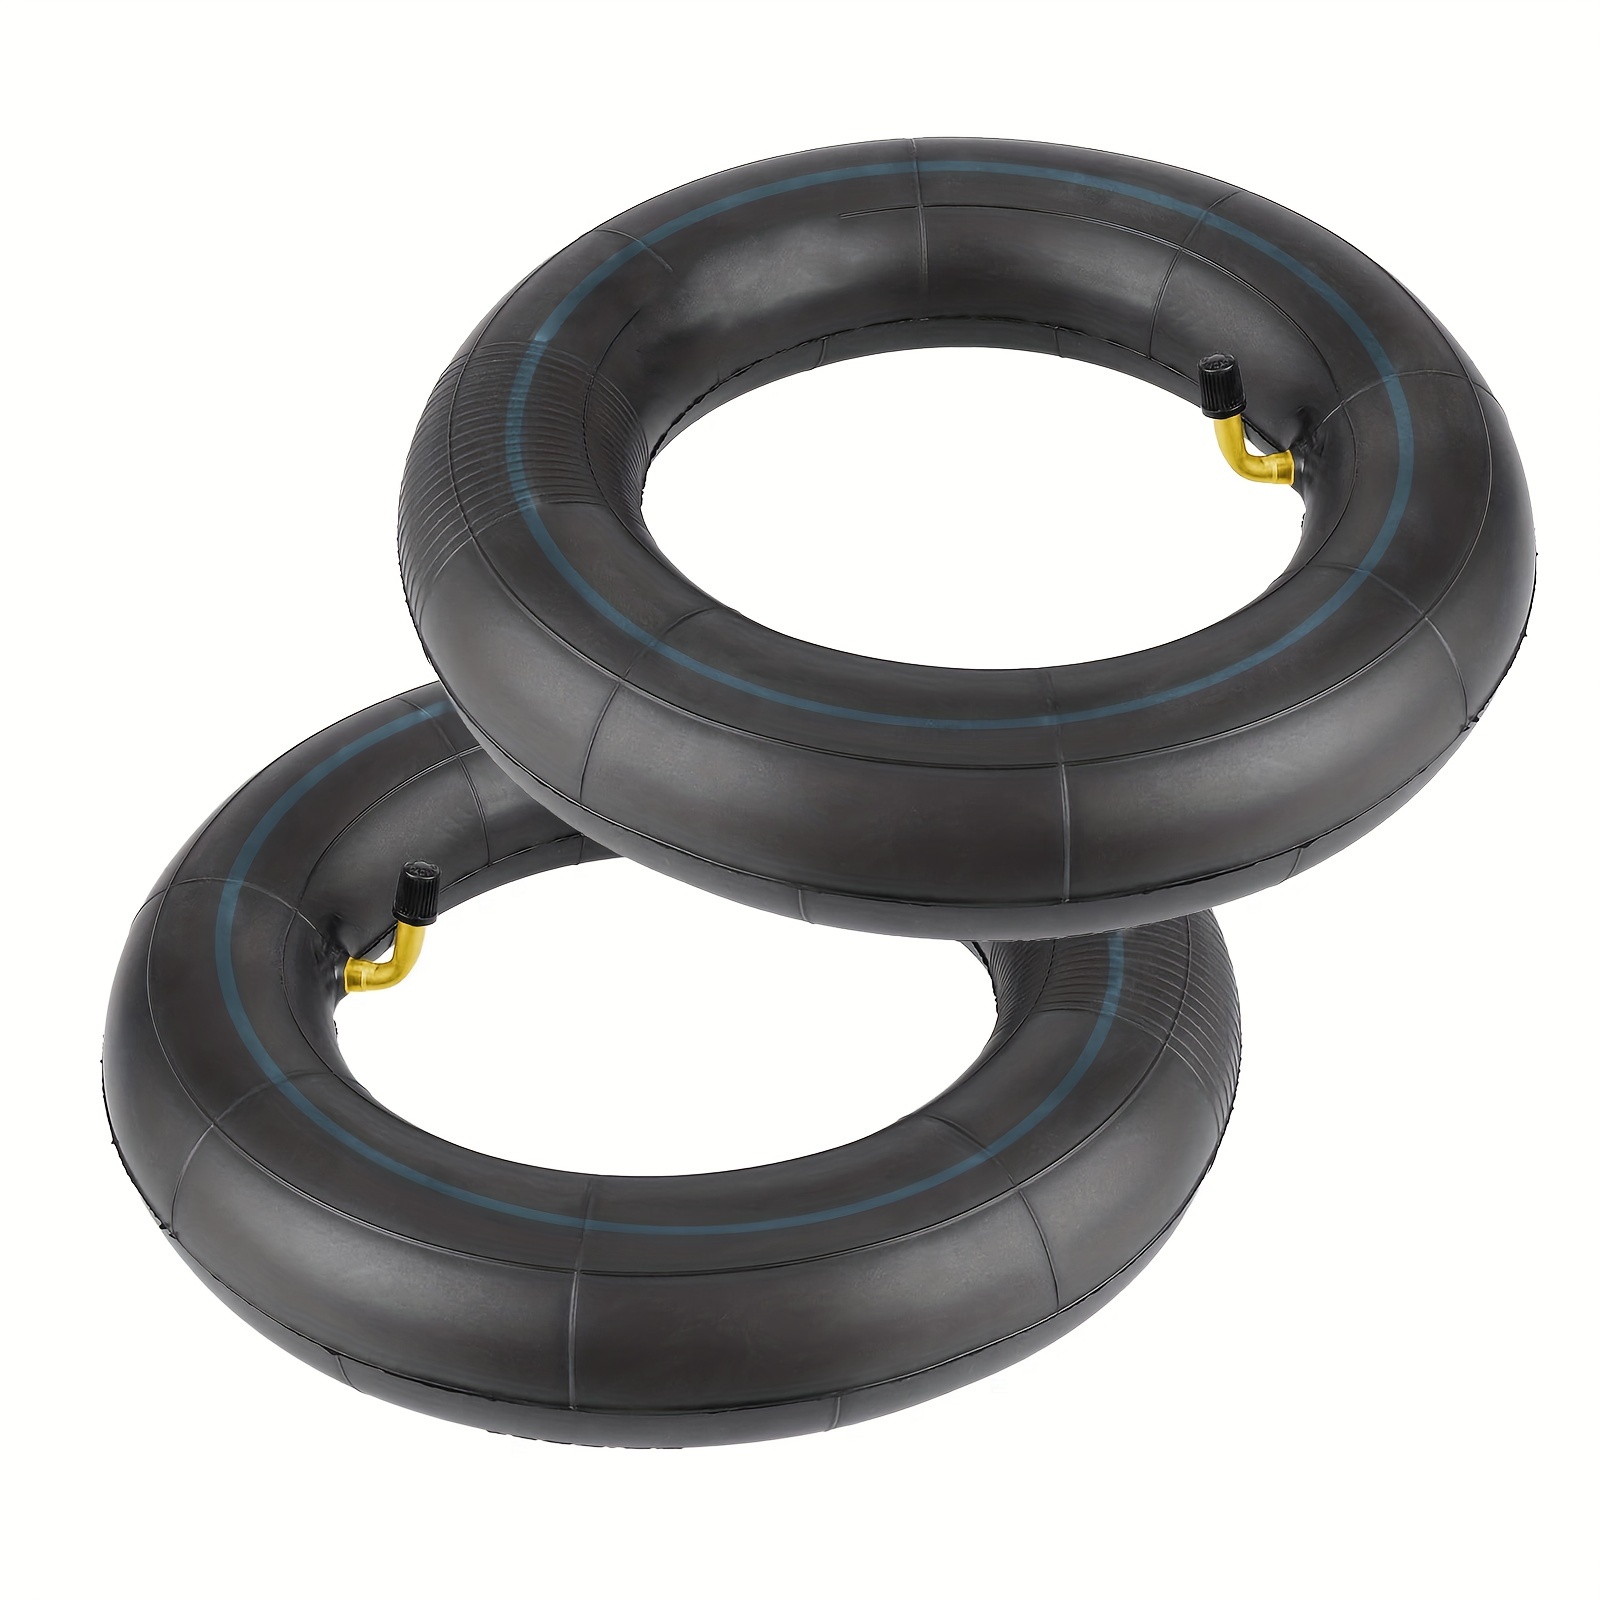 

2pcs 10x2.50 Inch Inner Tubes With 90/90 Angle Valve For Kugoo M4 Electric Scooter. Compatible With 10x3.0 Or 80/65-6 Tire